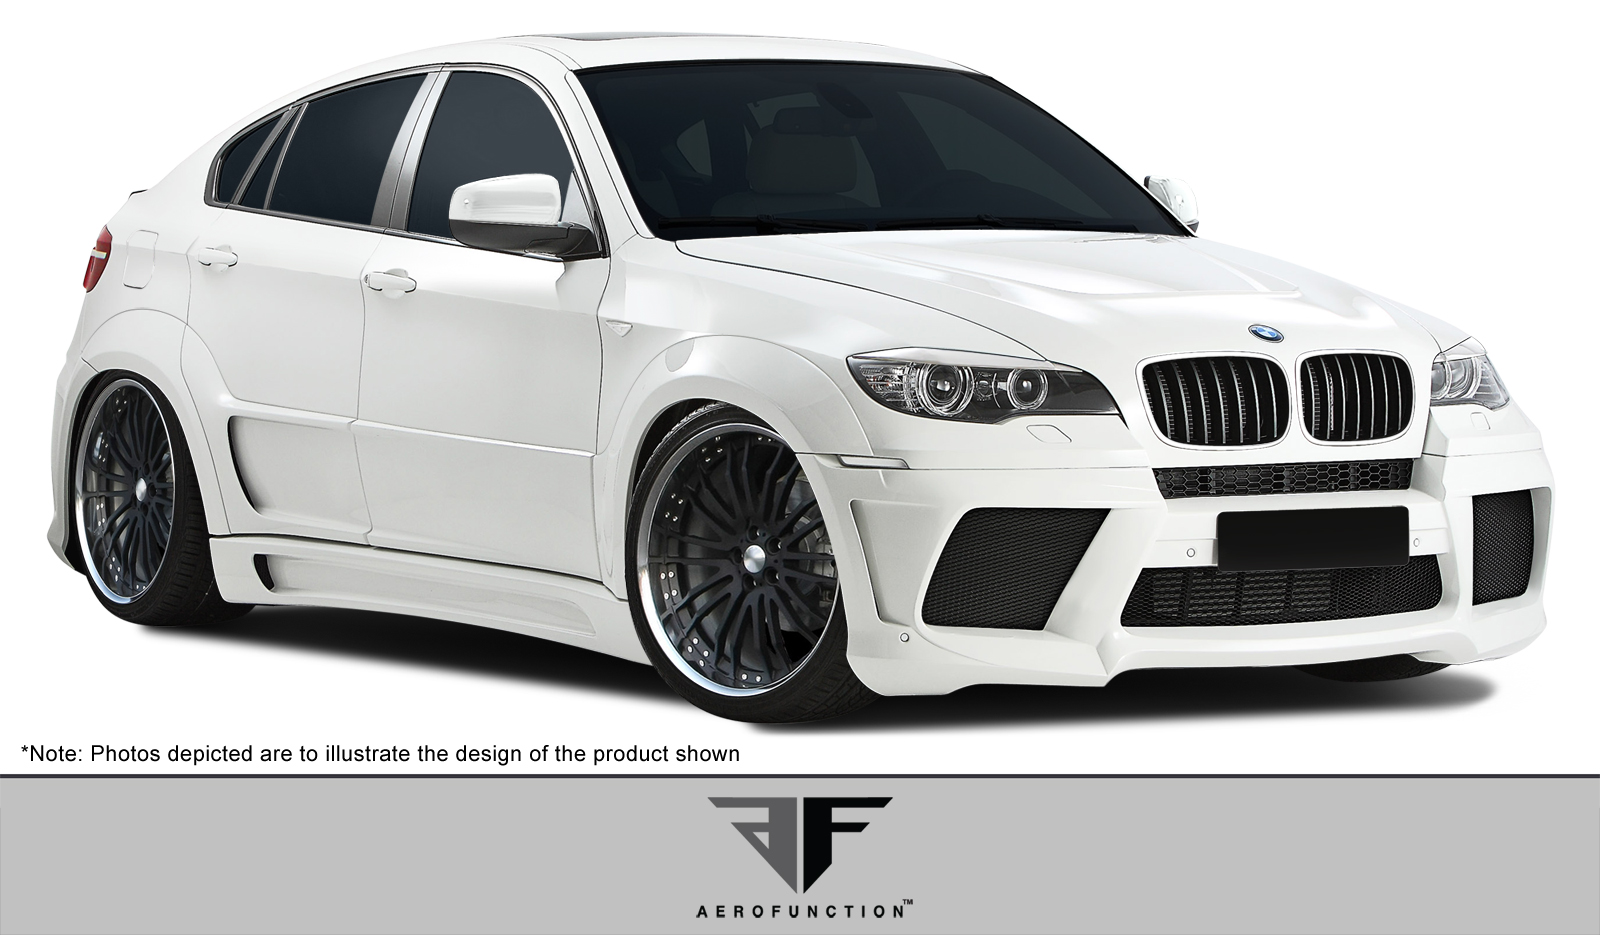 Other Body Kit Bodykit for 2009 BMW X6 ALL - BMW X6 X6M AF-3 Wide Body Kit ( GFK ) - 13 Piece - Includes AF-3 Wide Body Front Bumper Cover (1079